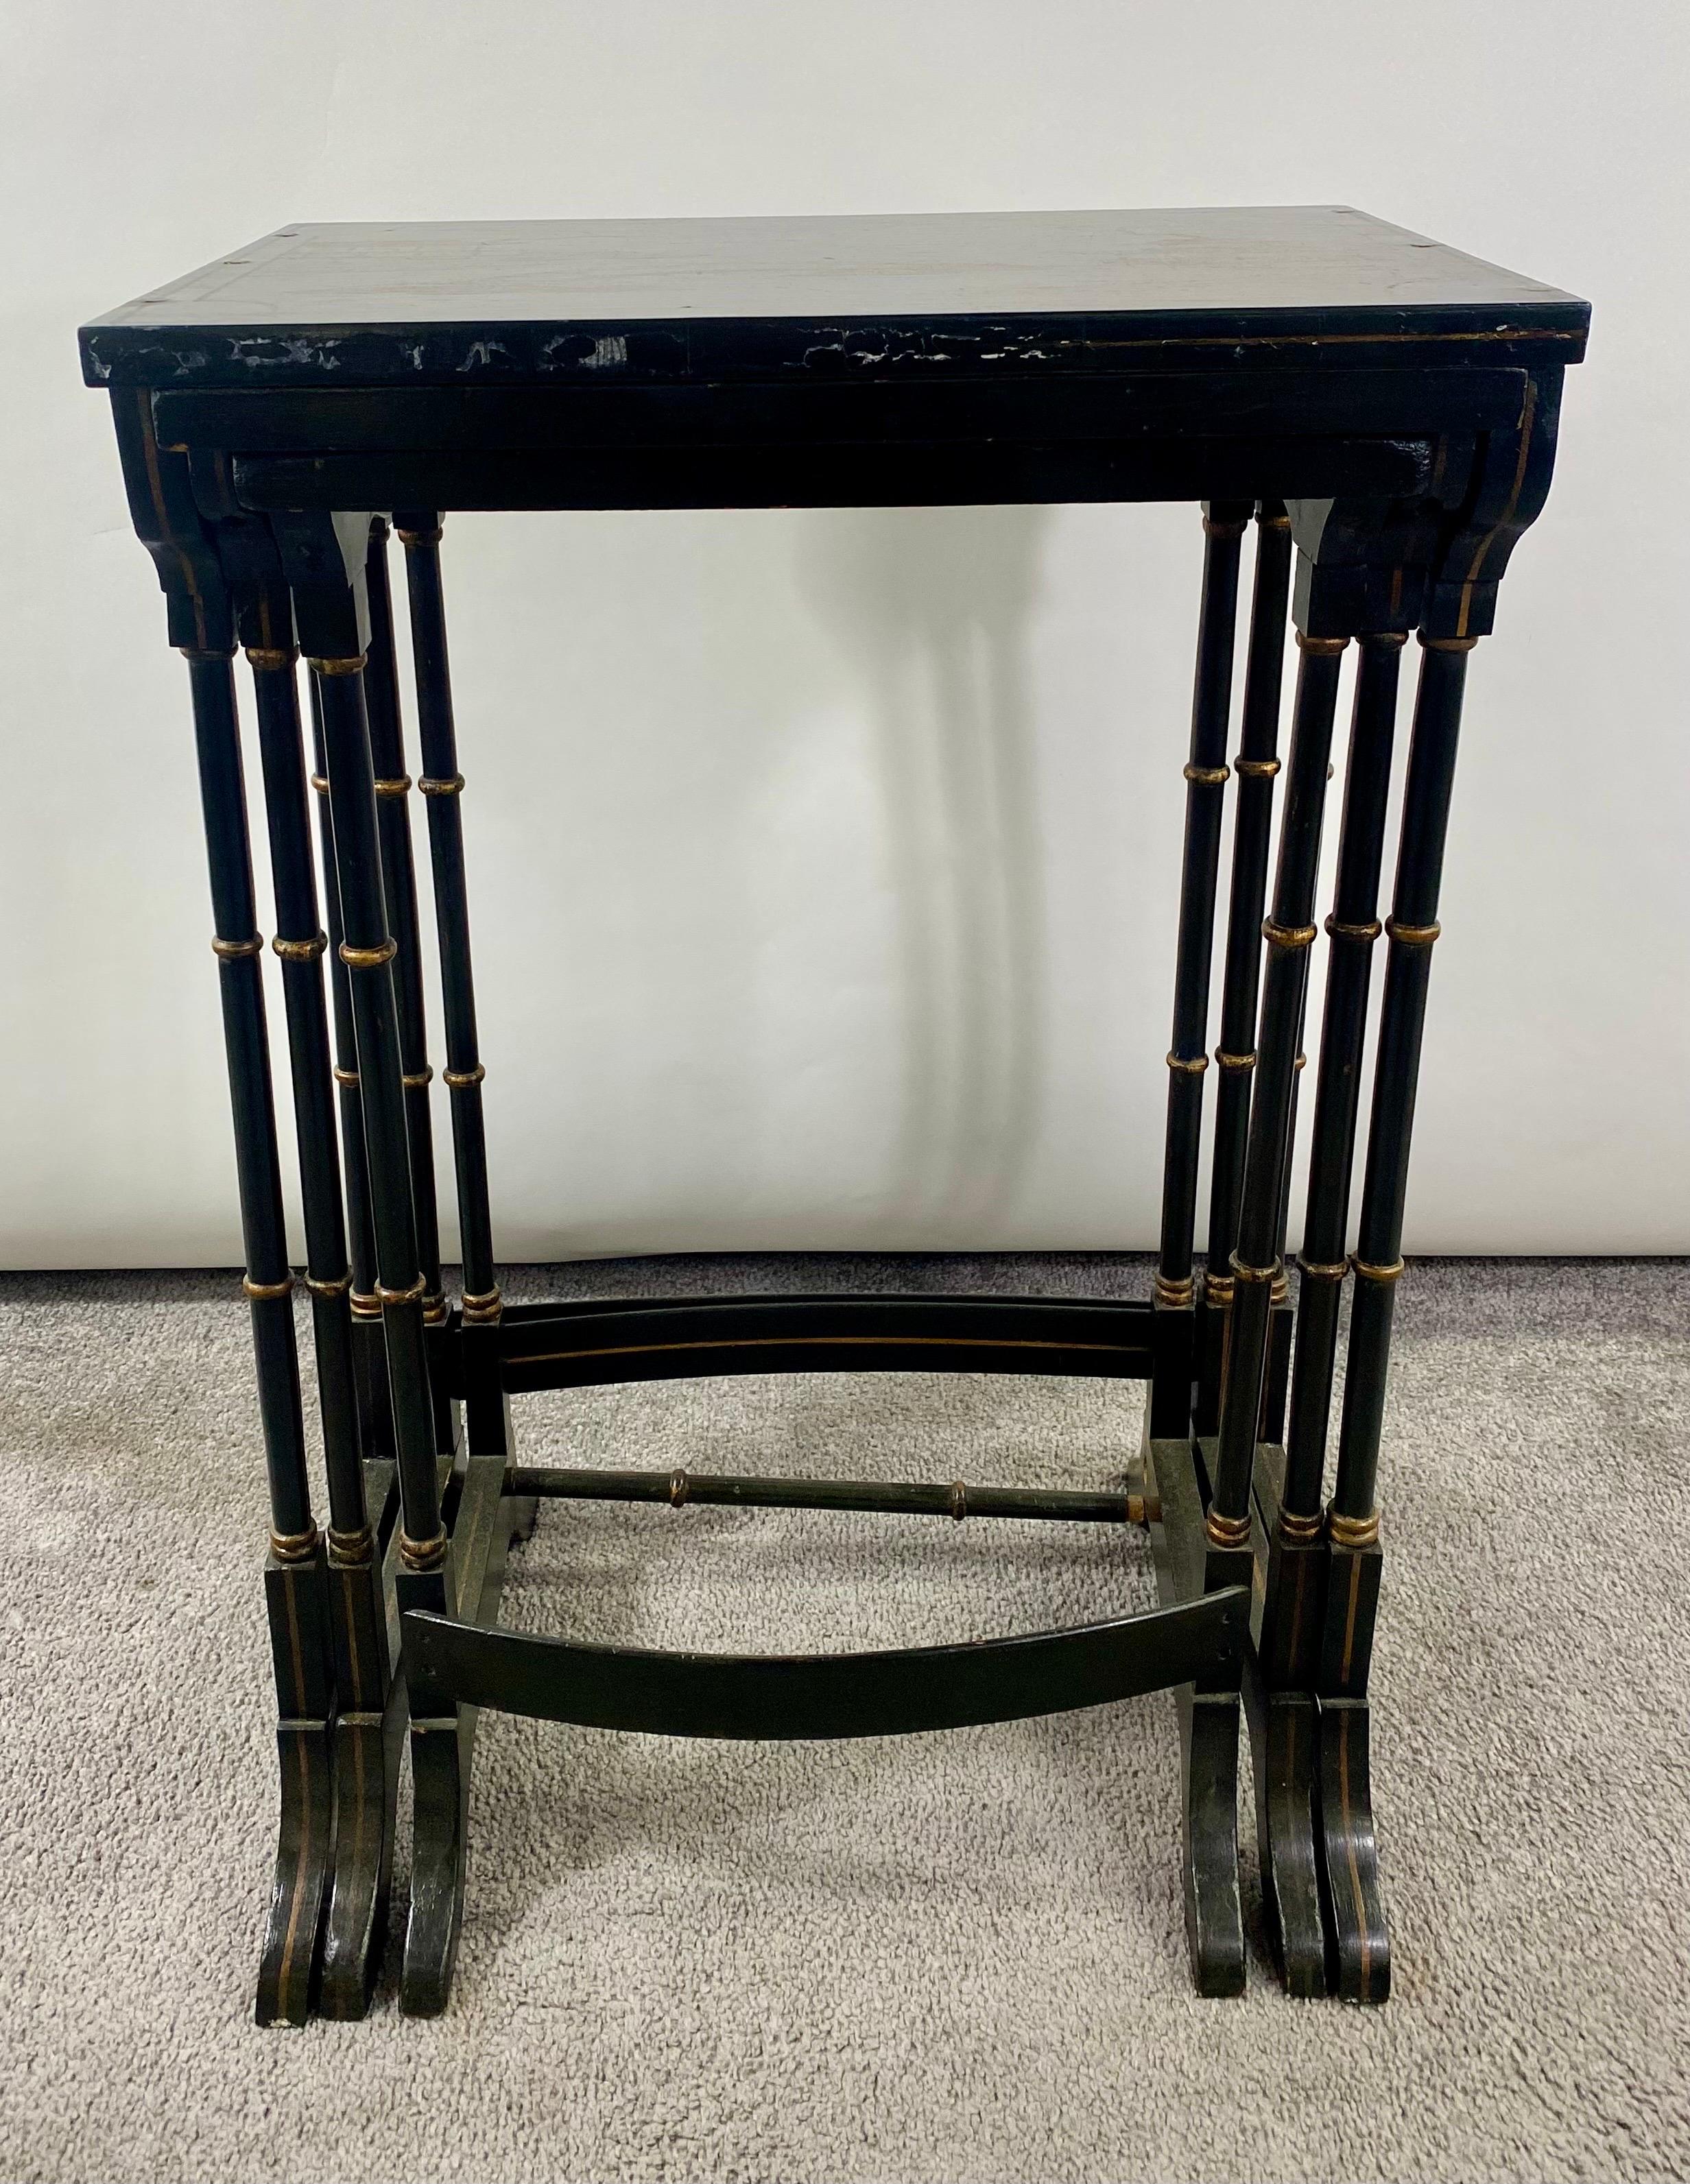 Early 20th century chinoiserie black lacquered Japanned nesting tables, set of 3
A classy set of three early 20th century chinoiserie decorated japanned nesting tables. Each Table is having black lacquer japanned finish and features hand painted